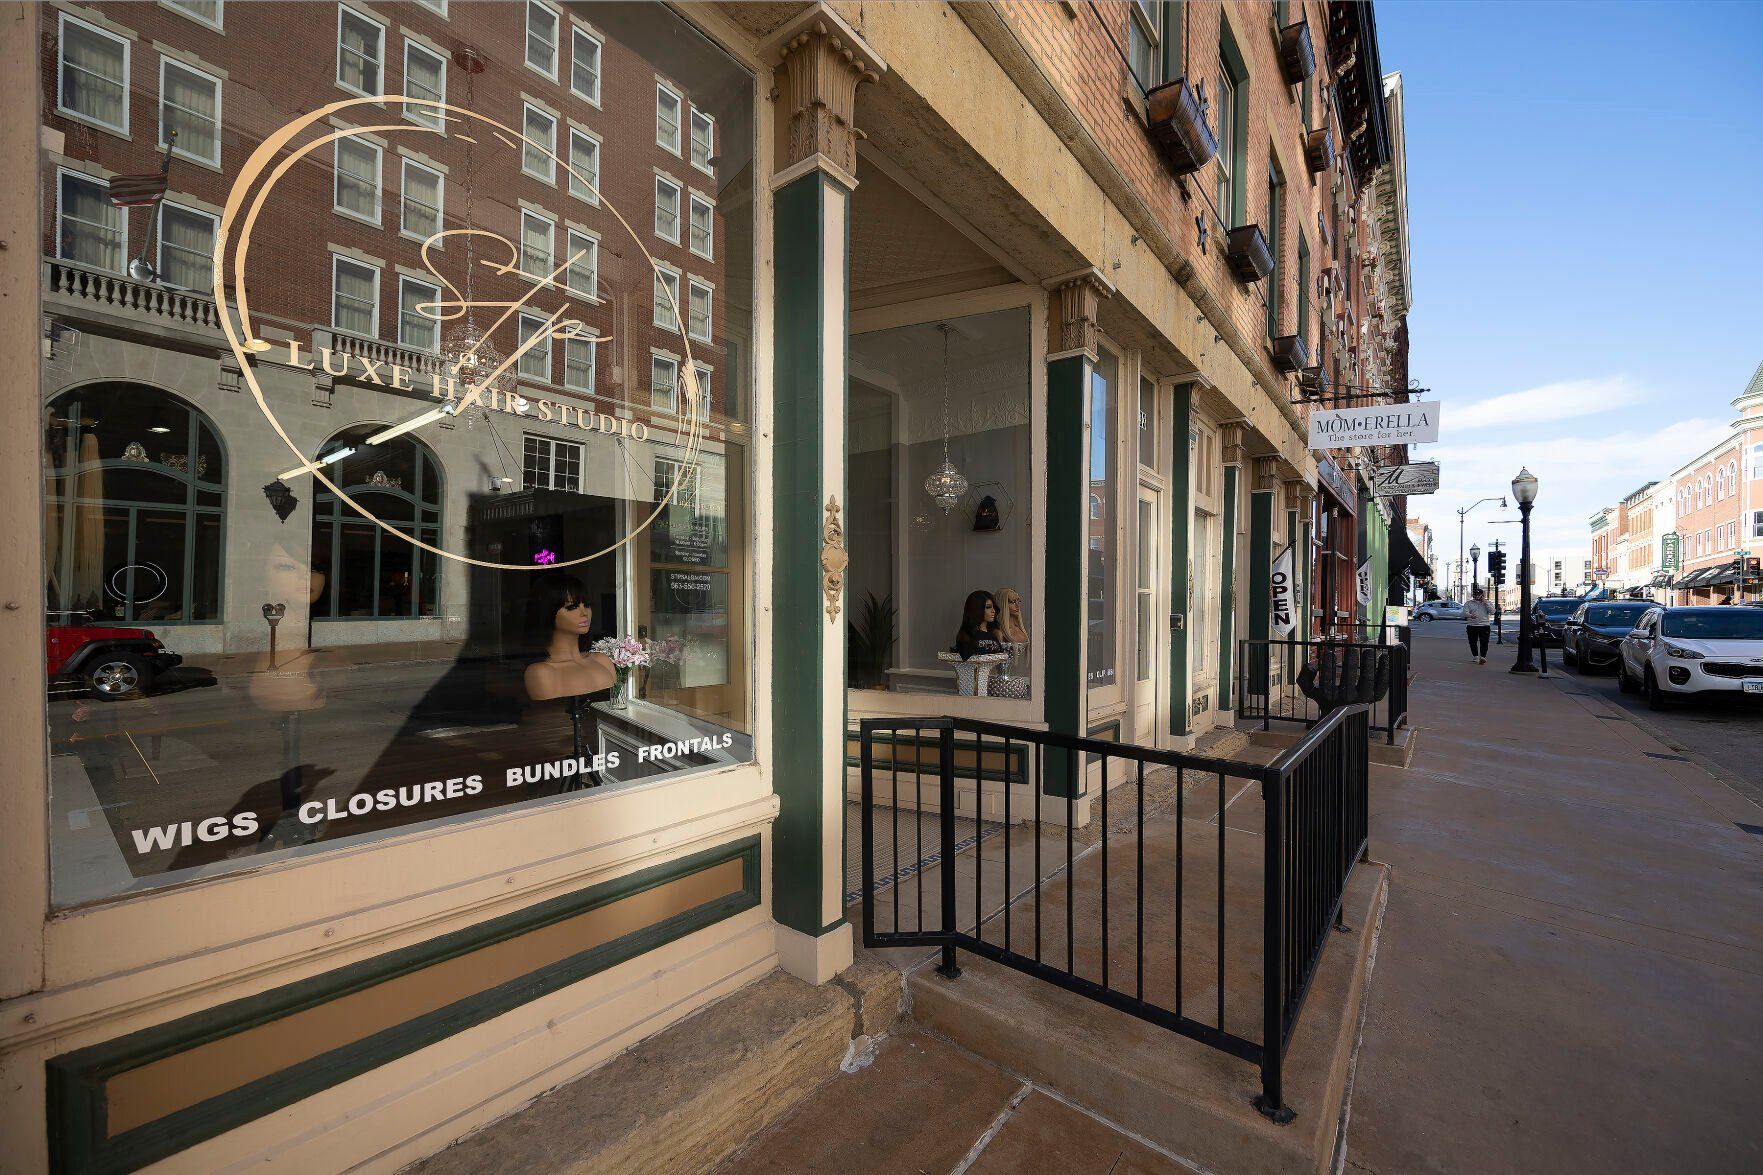 Exterior of STP Luxe Hair Studio on Main Street in Dubuque.    PHOTO CREDIT: Stephen Gassman